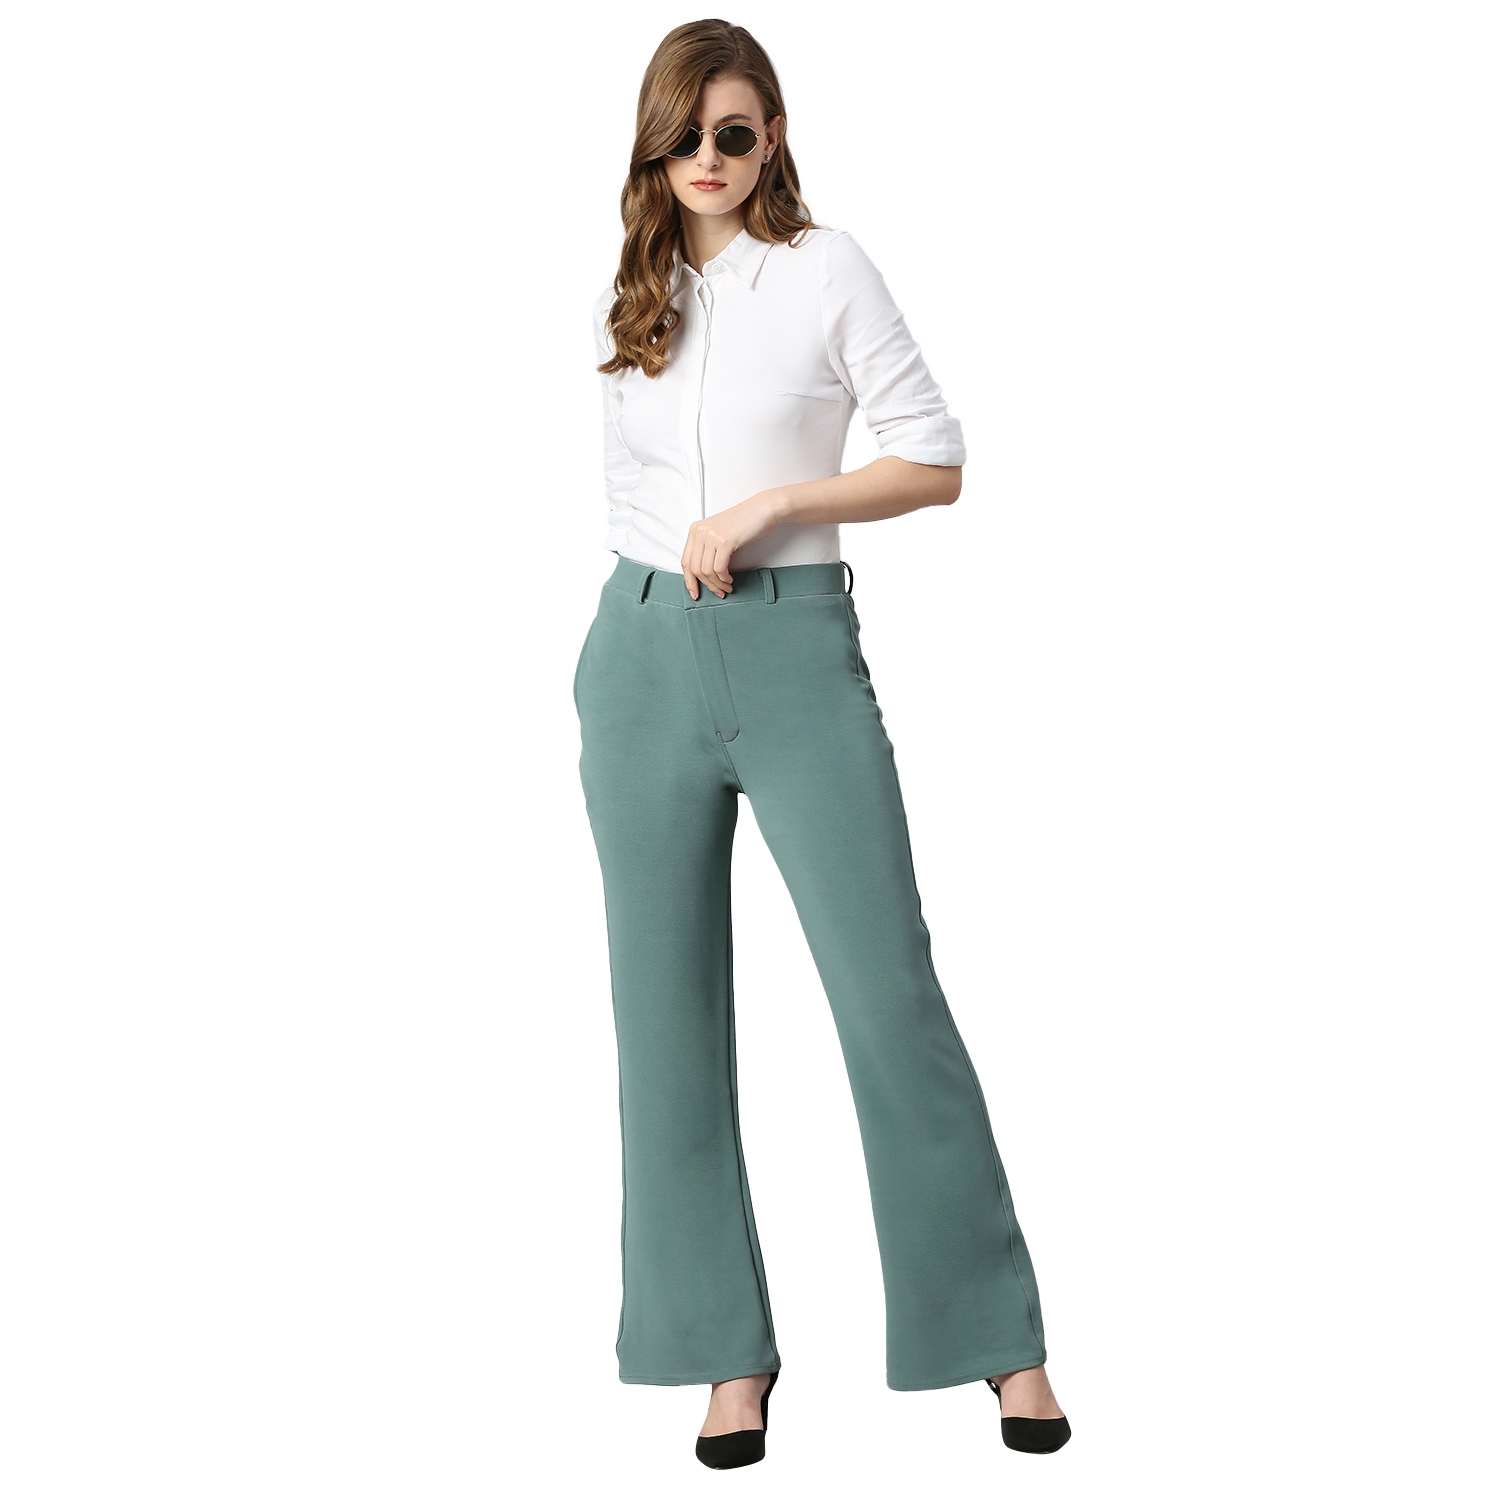 Cotton Lycra Mint Trouser For Women's.Ladies Casual Trouser,Track Pant,Girls  stylish Trouser Pant.Elastic Staright Pants, for Casual Office Work  wear.Slim Fit Formal Trousers/Pant.formal Trouser For Womens.Womens  Trousers Cotton Pant.Formal Tousers For